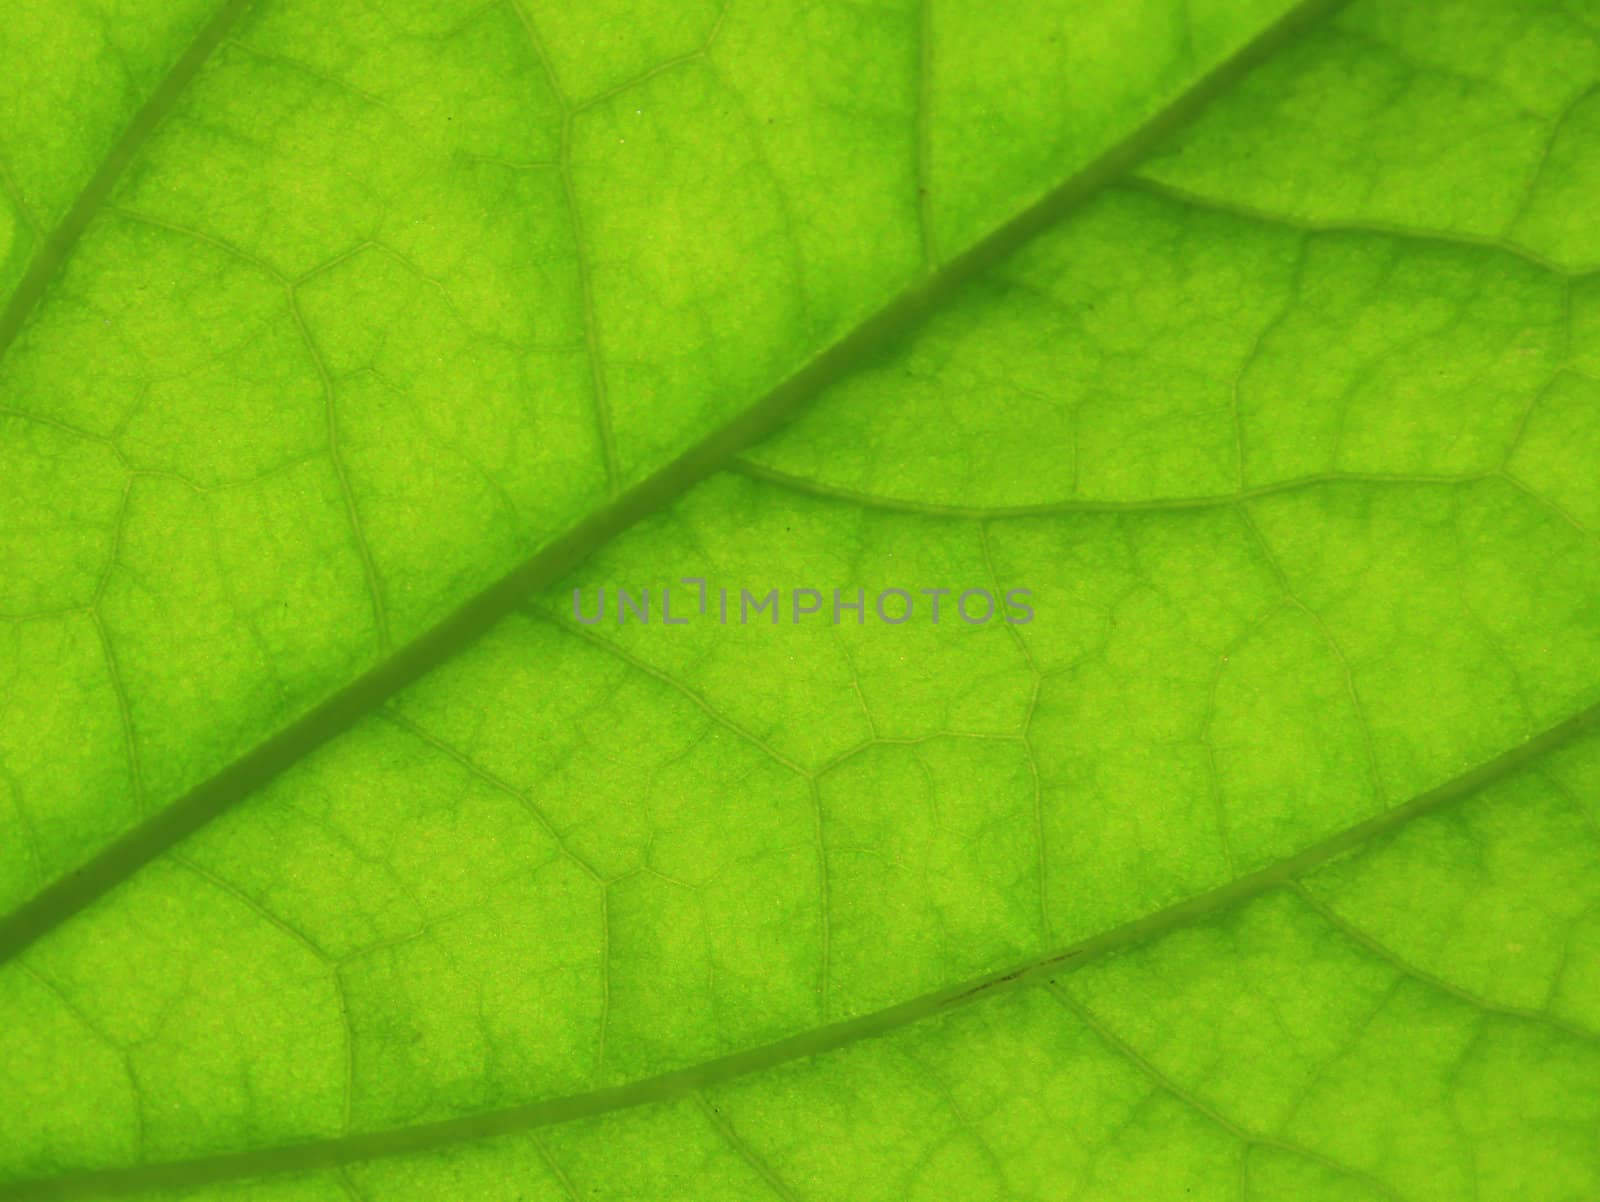 A green leaf background with lines